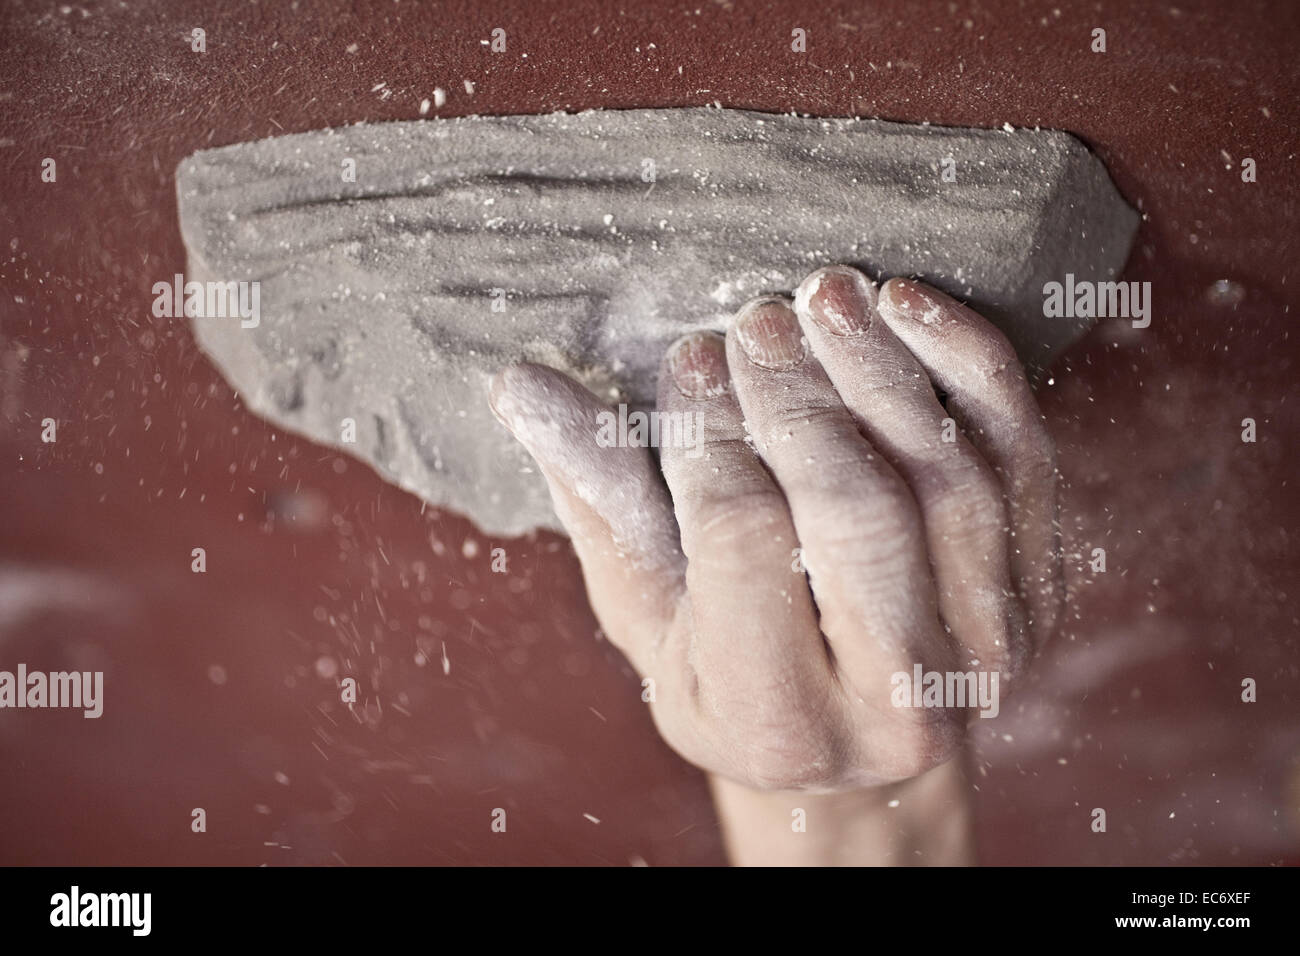 Climbers hand on a grip in a climbing hall, with chalk dust and red backround Stock Photo